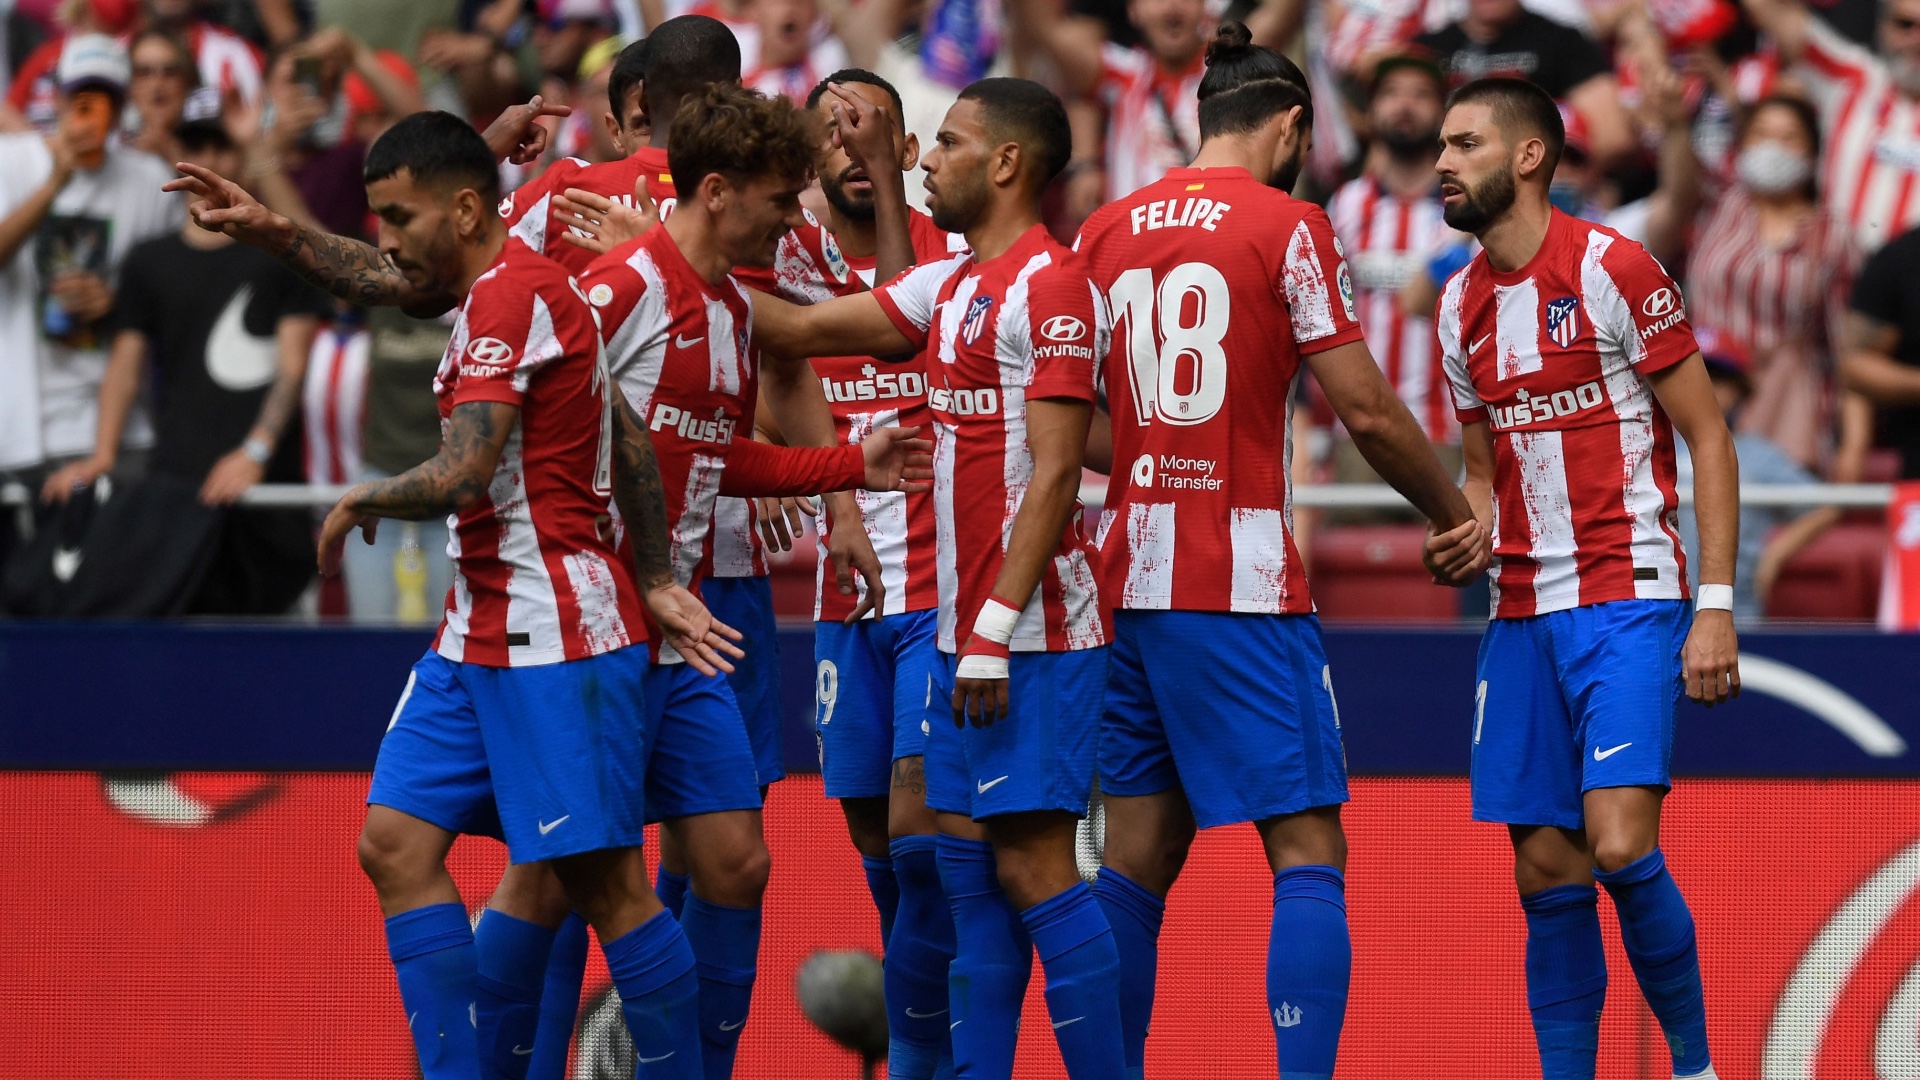 Why Atlético De Madrid Won’t Form A Guard Of Honor For Real Madrid